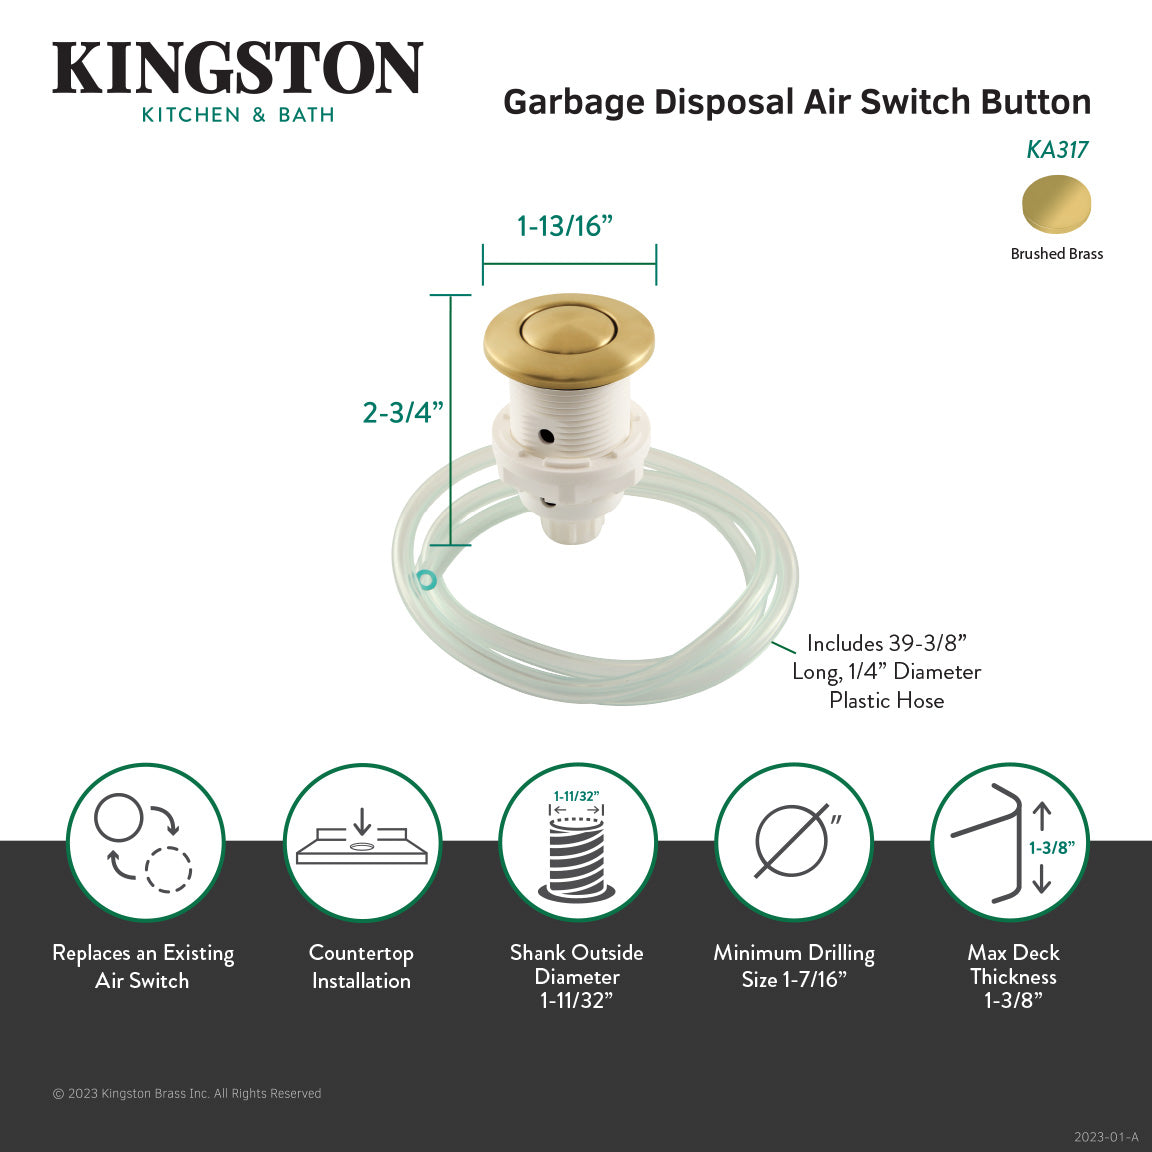 Trimscape KA317 Garbage Disposal Air Switch Button, Brushed Brass